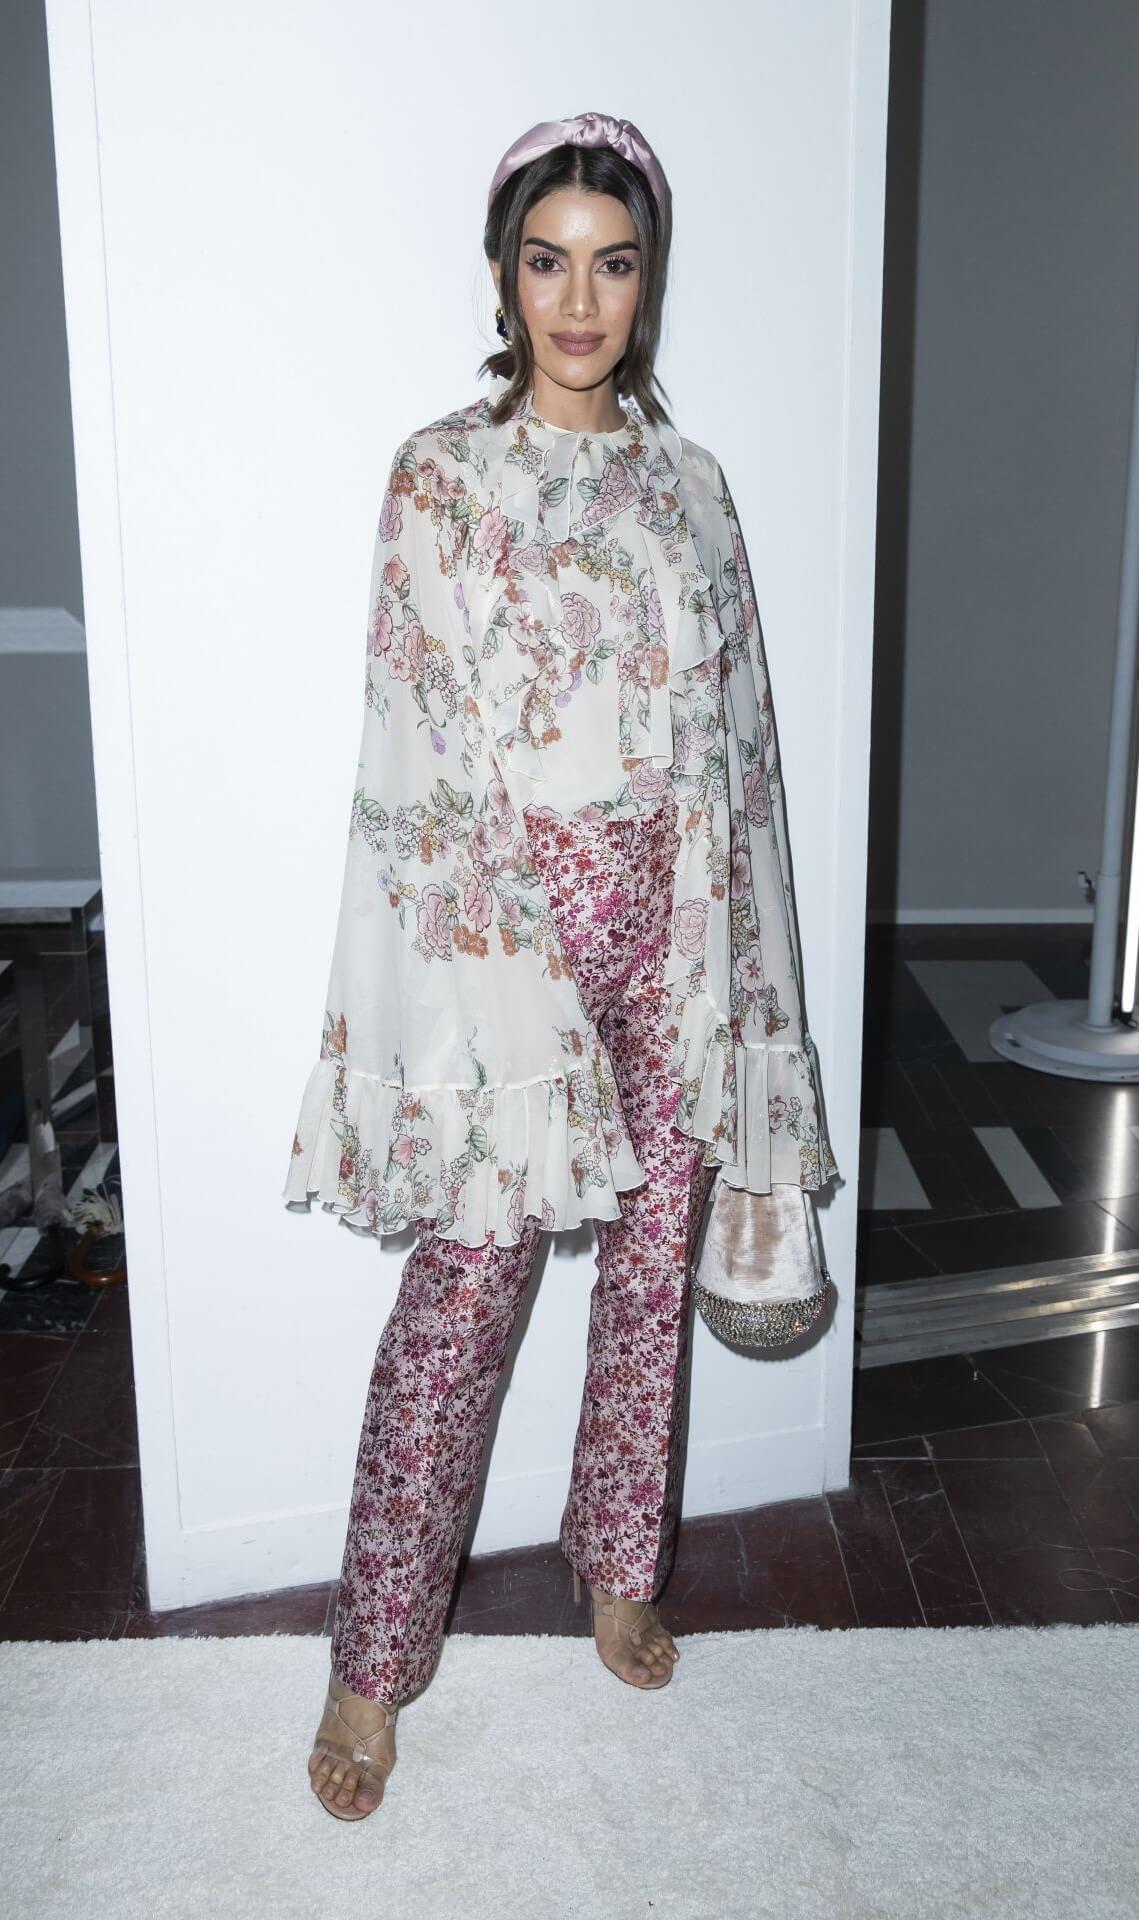 Camila Coelho In White Floral Printed Sheering Flare Sleeves Top With Pants At  Giambattista Valli Fashion Show in Paris